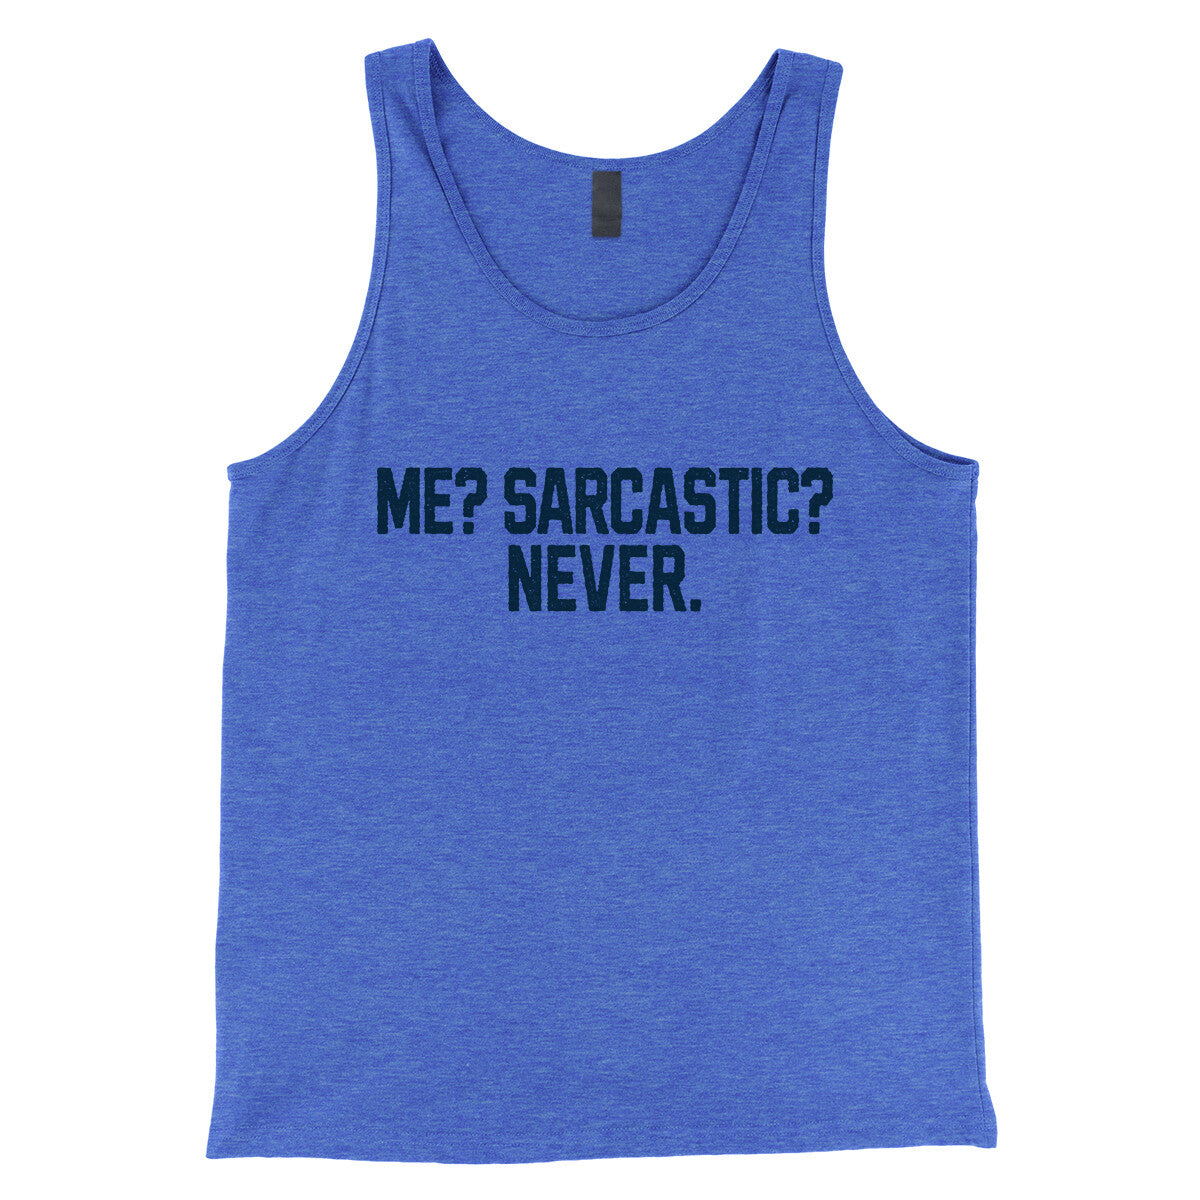 Me Sarcastic Never in True Royal TriBlend Color